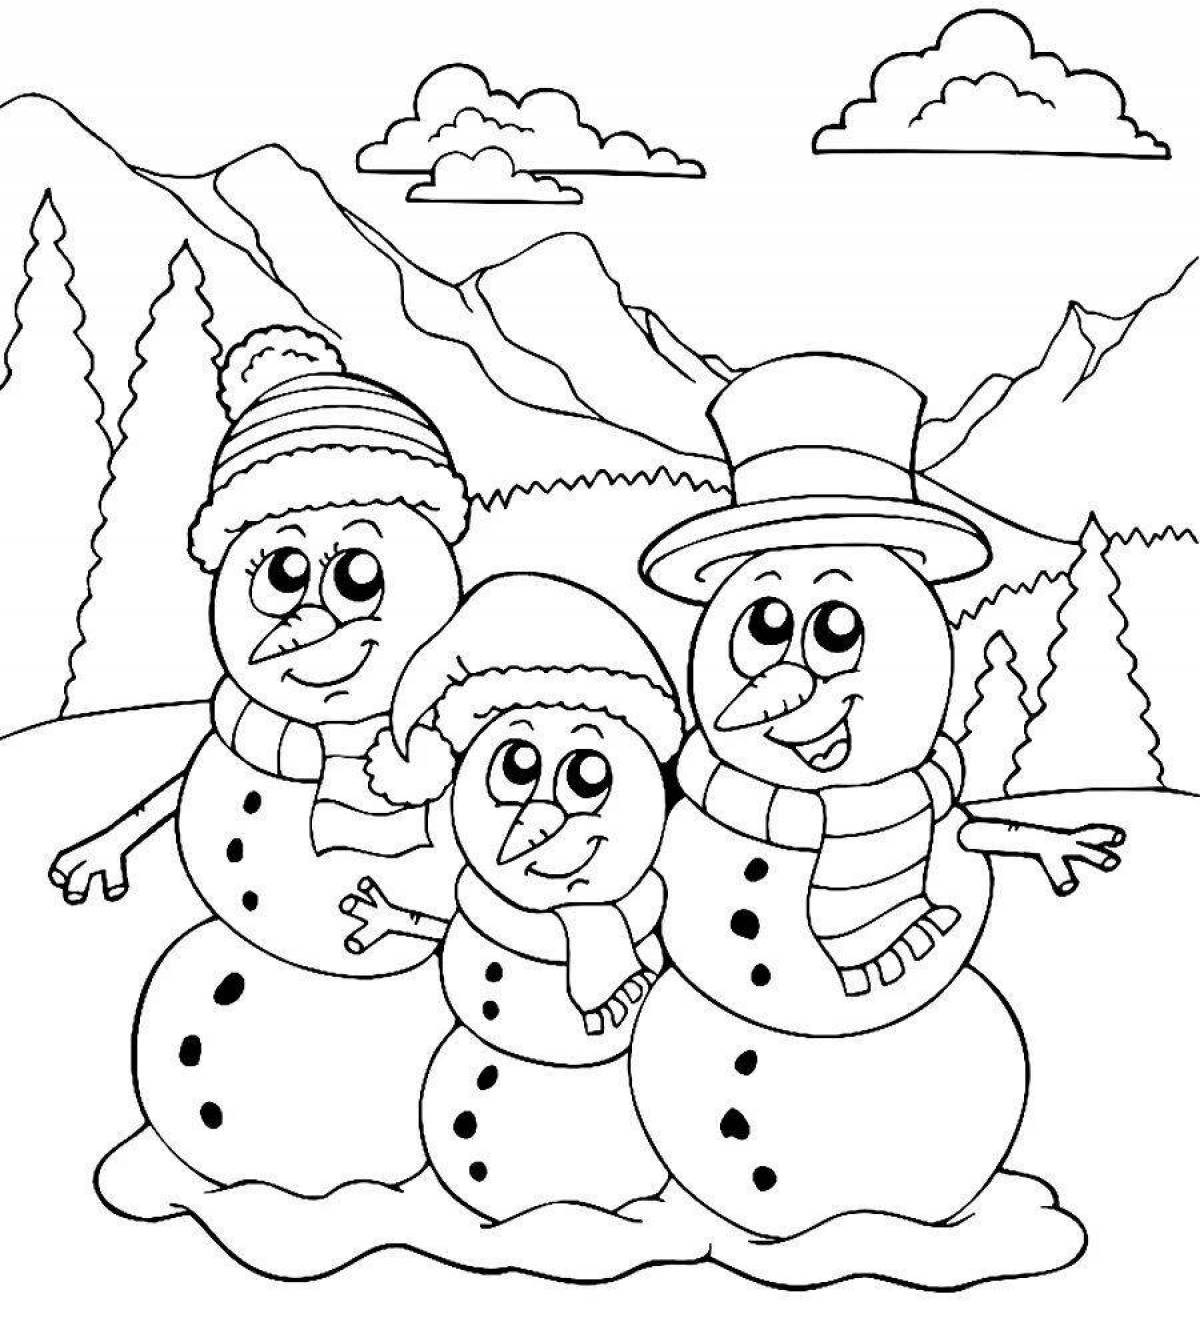 Coloring page amazing snowman family